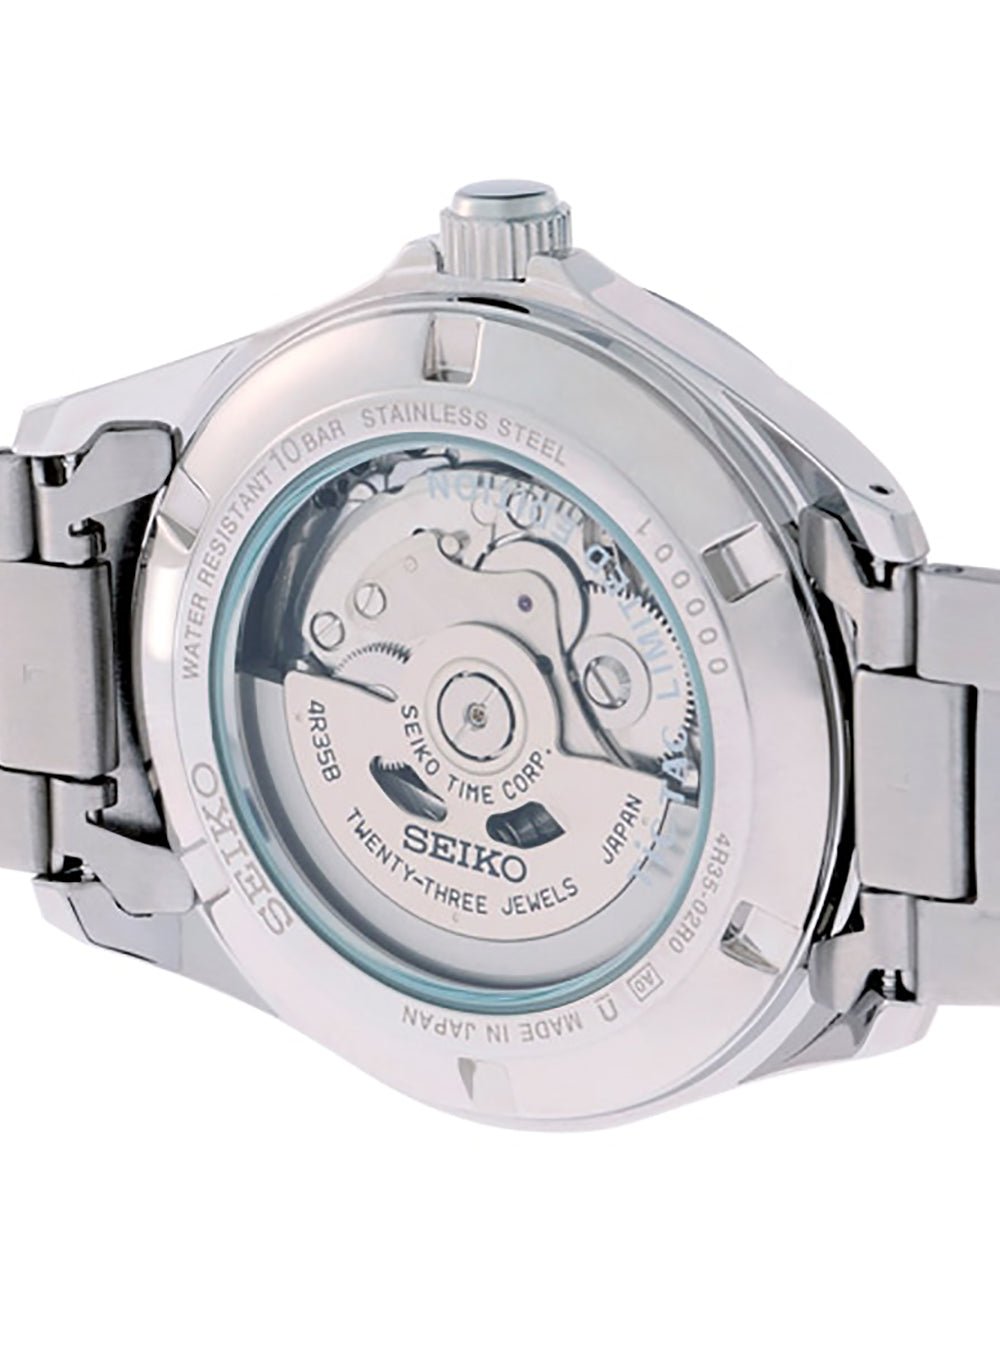 SEIKO × TiCTAC 35TH ANNIVERSARY LIMITED EDITION SZSB028 MADE IN JAPAN JDMWRISTWATCHjapan-select